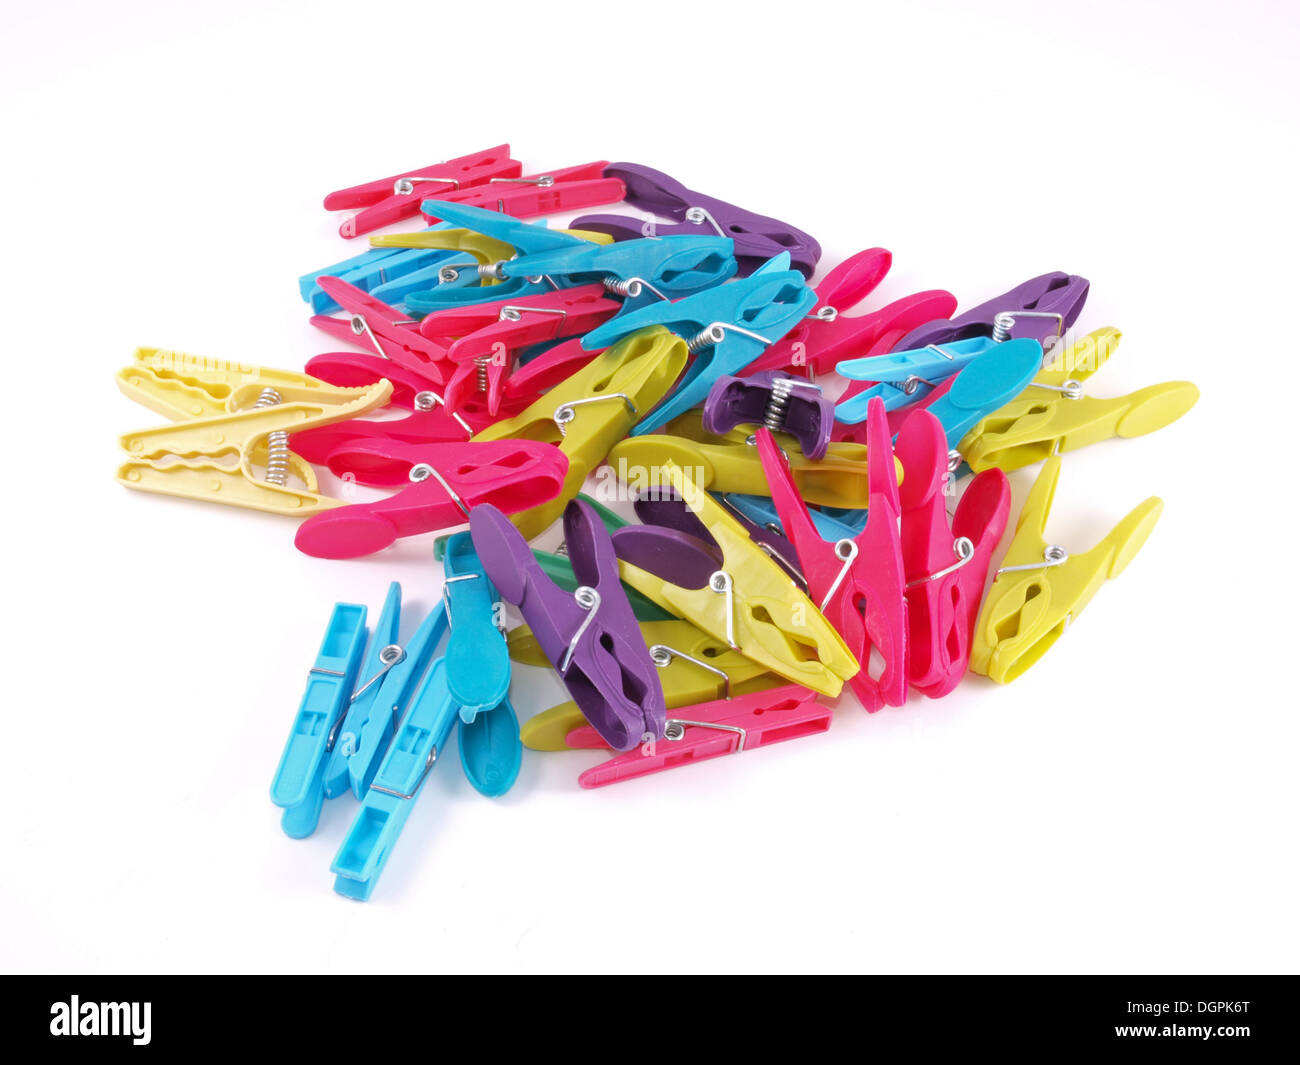 Multicolored plastic clothes pegs on a white background. Stock Photo